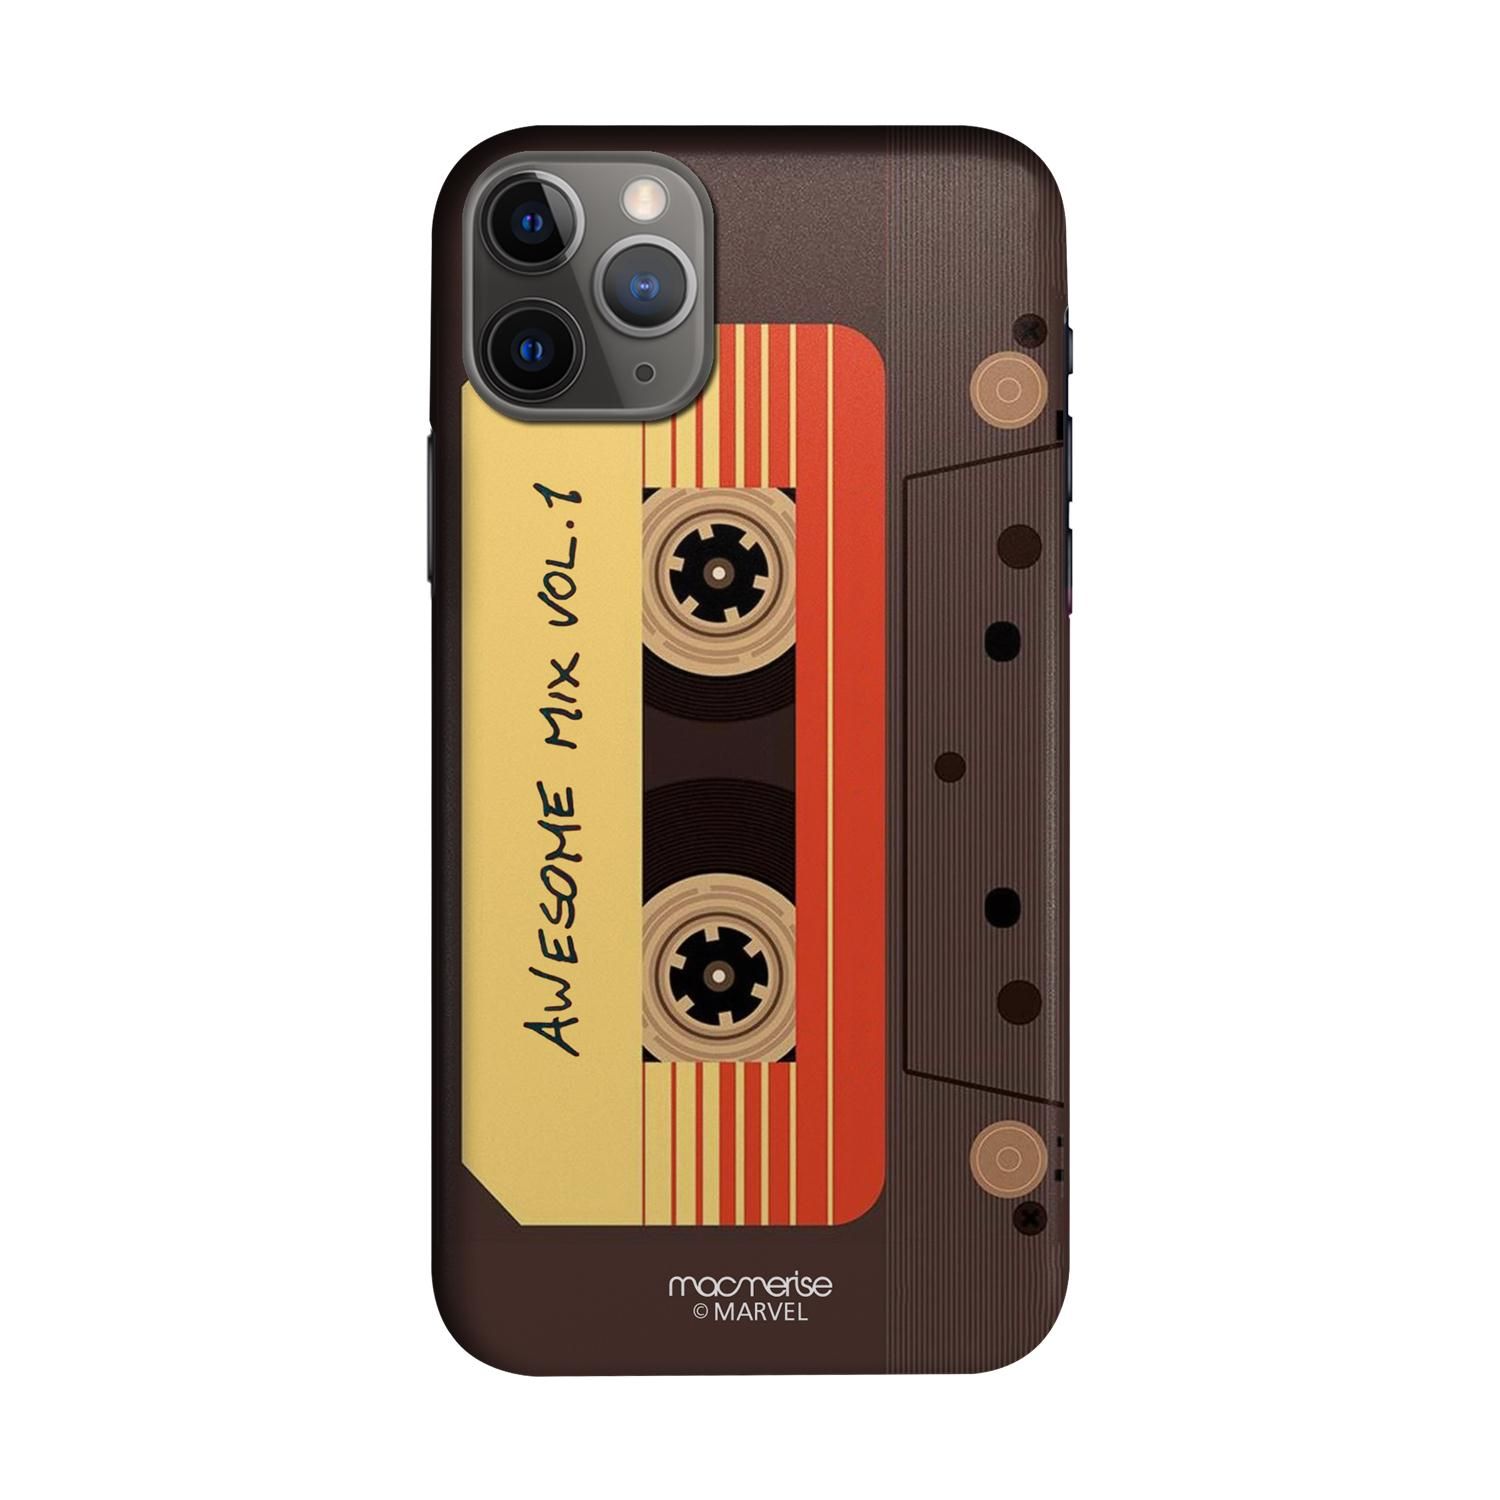 Buy Awesome Mix Tape - Sleek Phone Case for iPhone 11 Pro Max Online